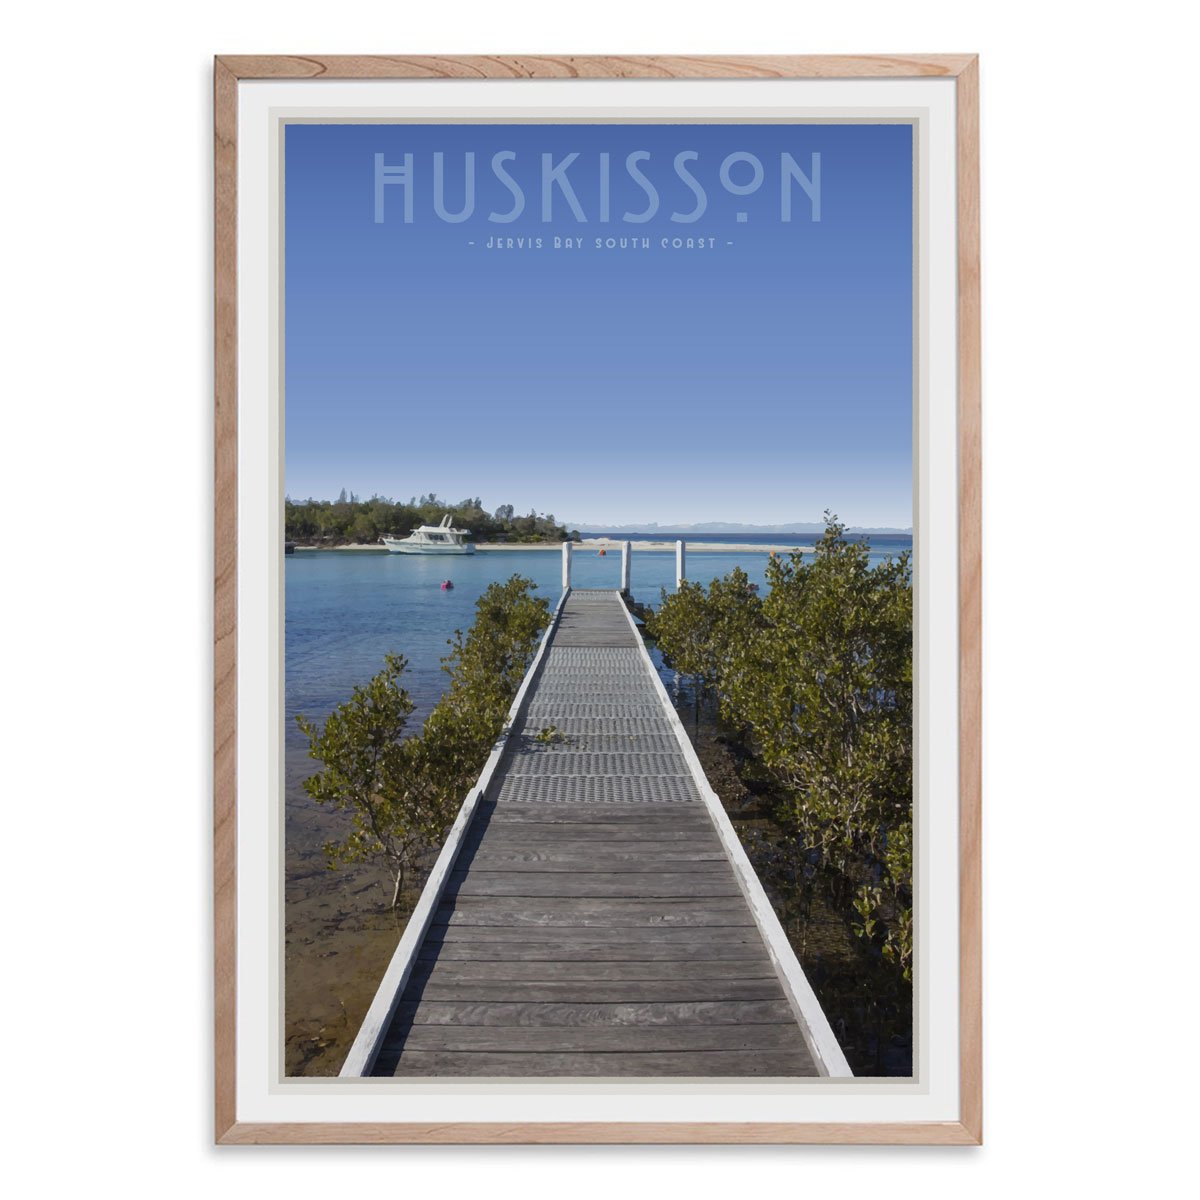 Huskisson vintage travel style oak framed print by places we luv